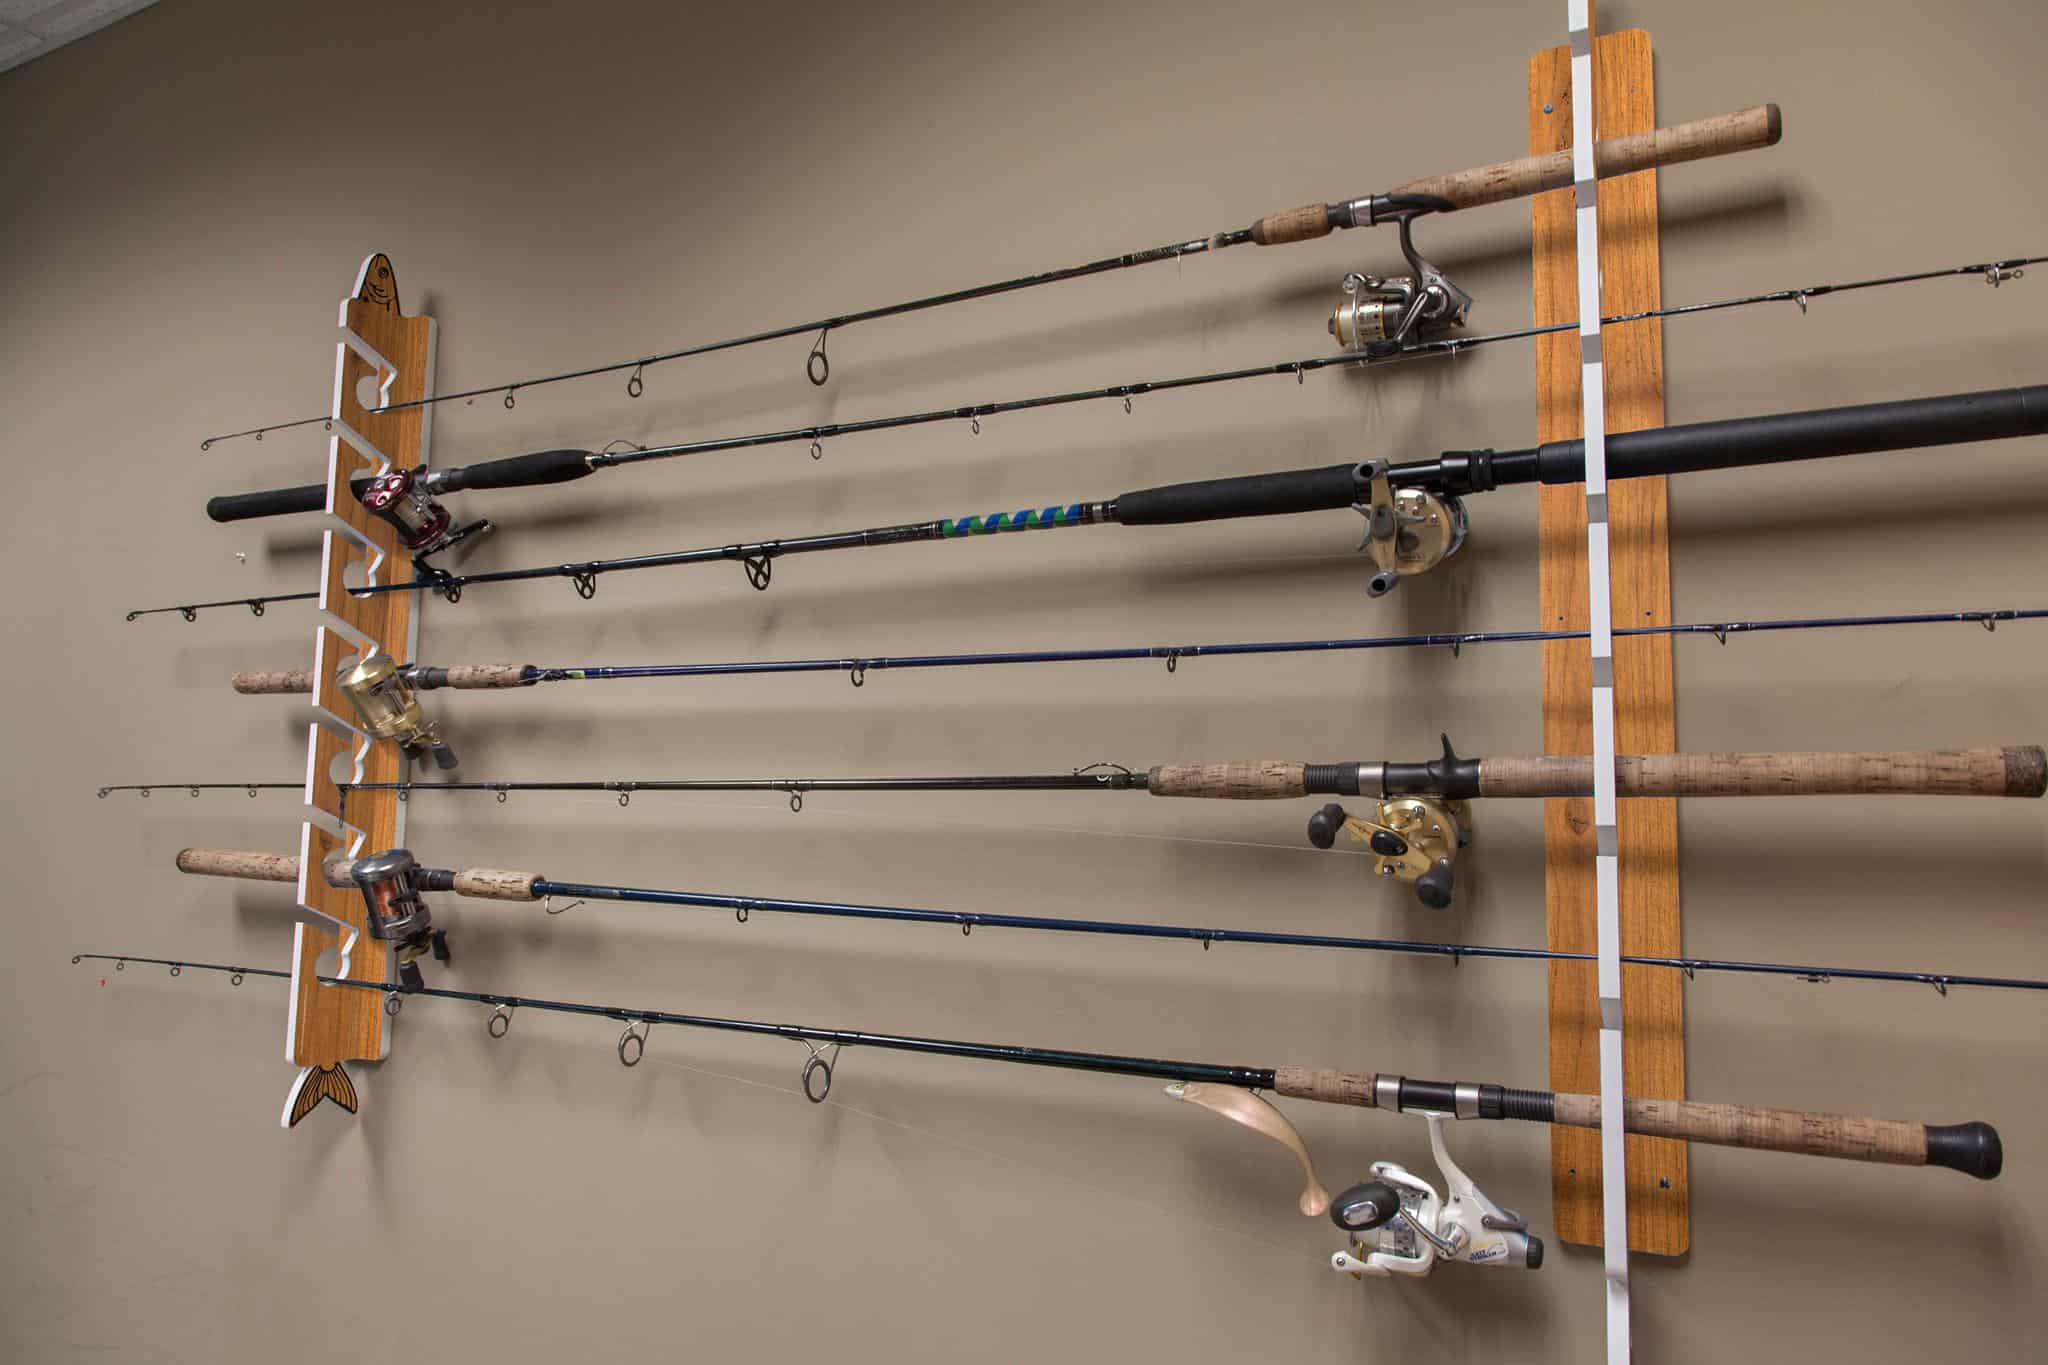 How to Store Fishing Rods  